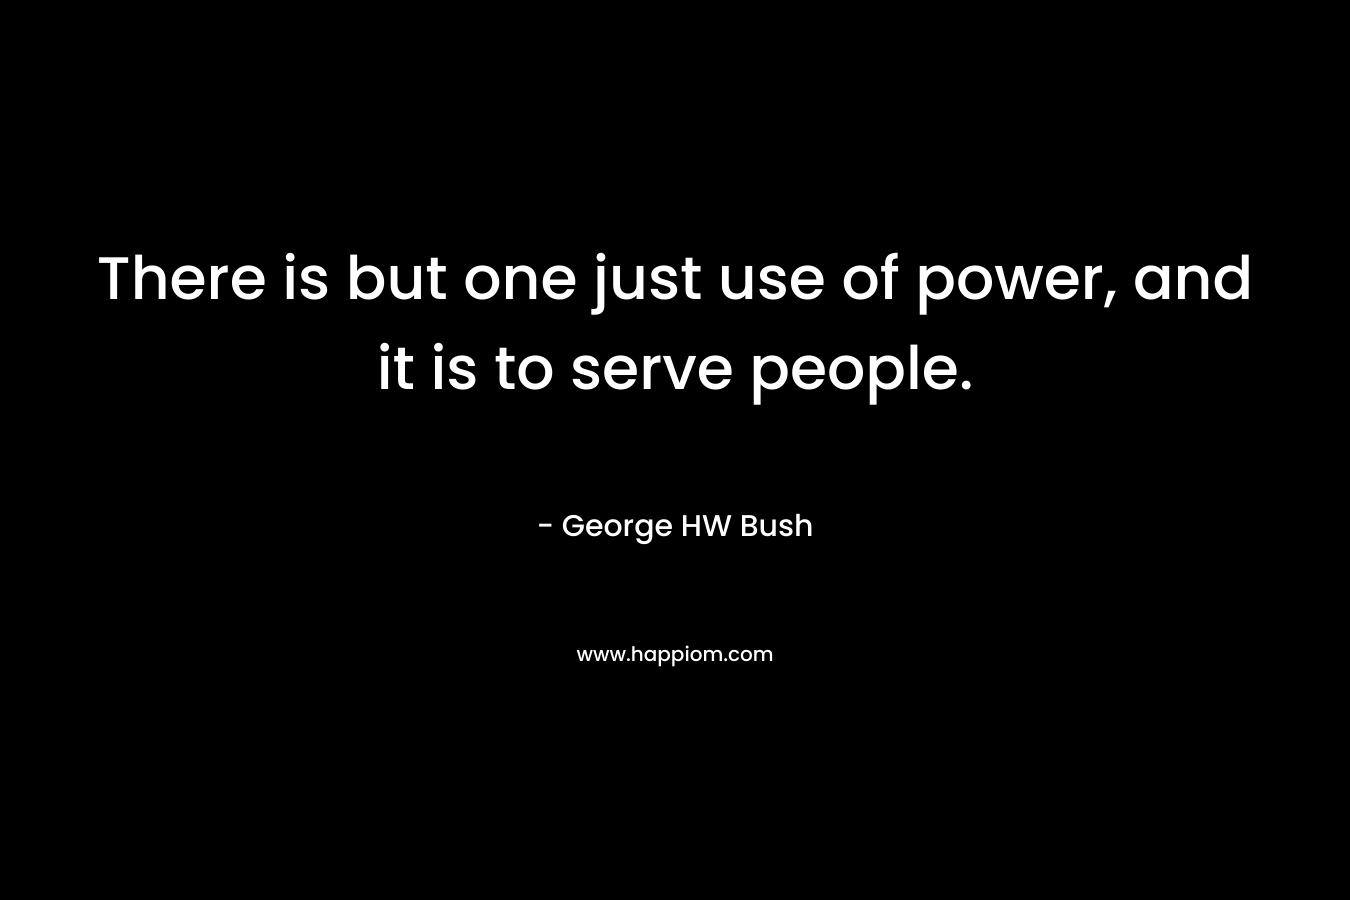 There is but one just use of power, and it is to serve people.